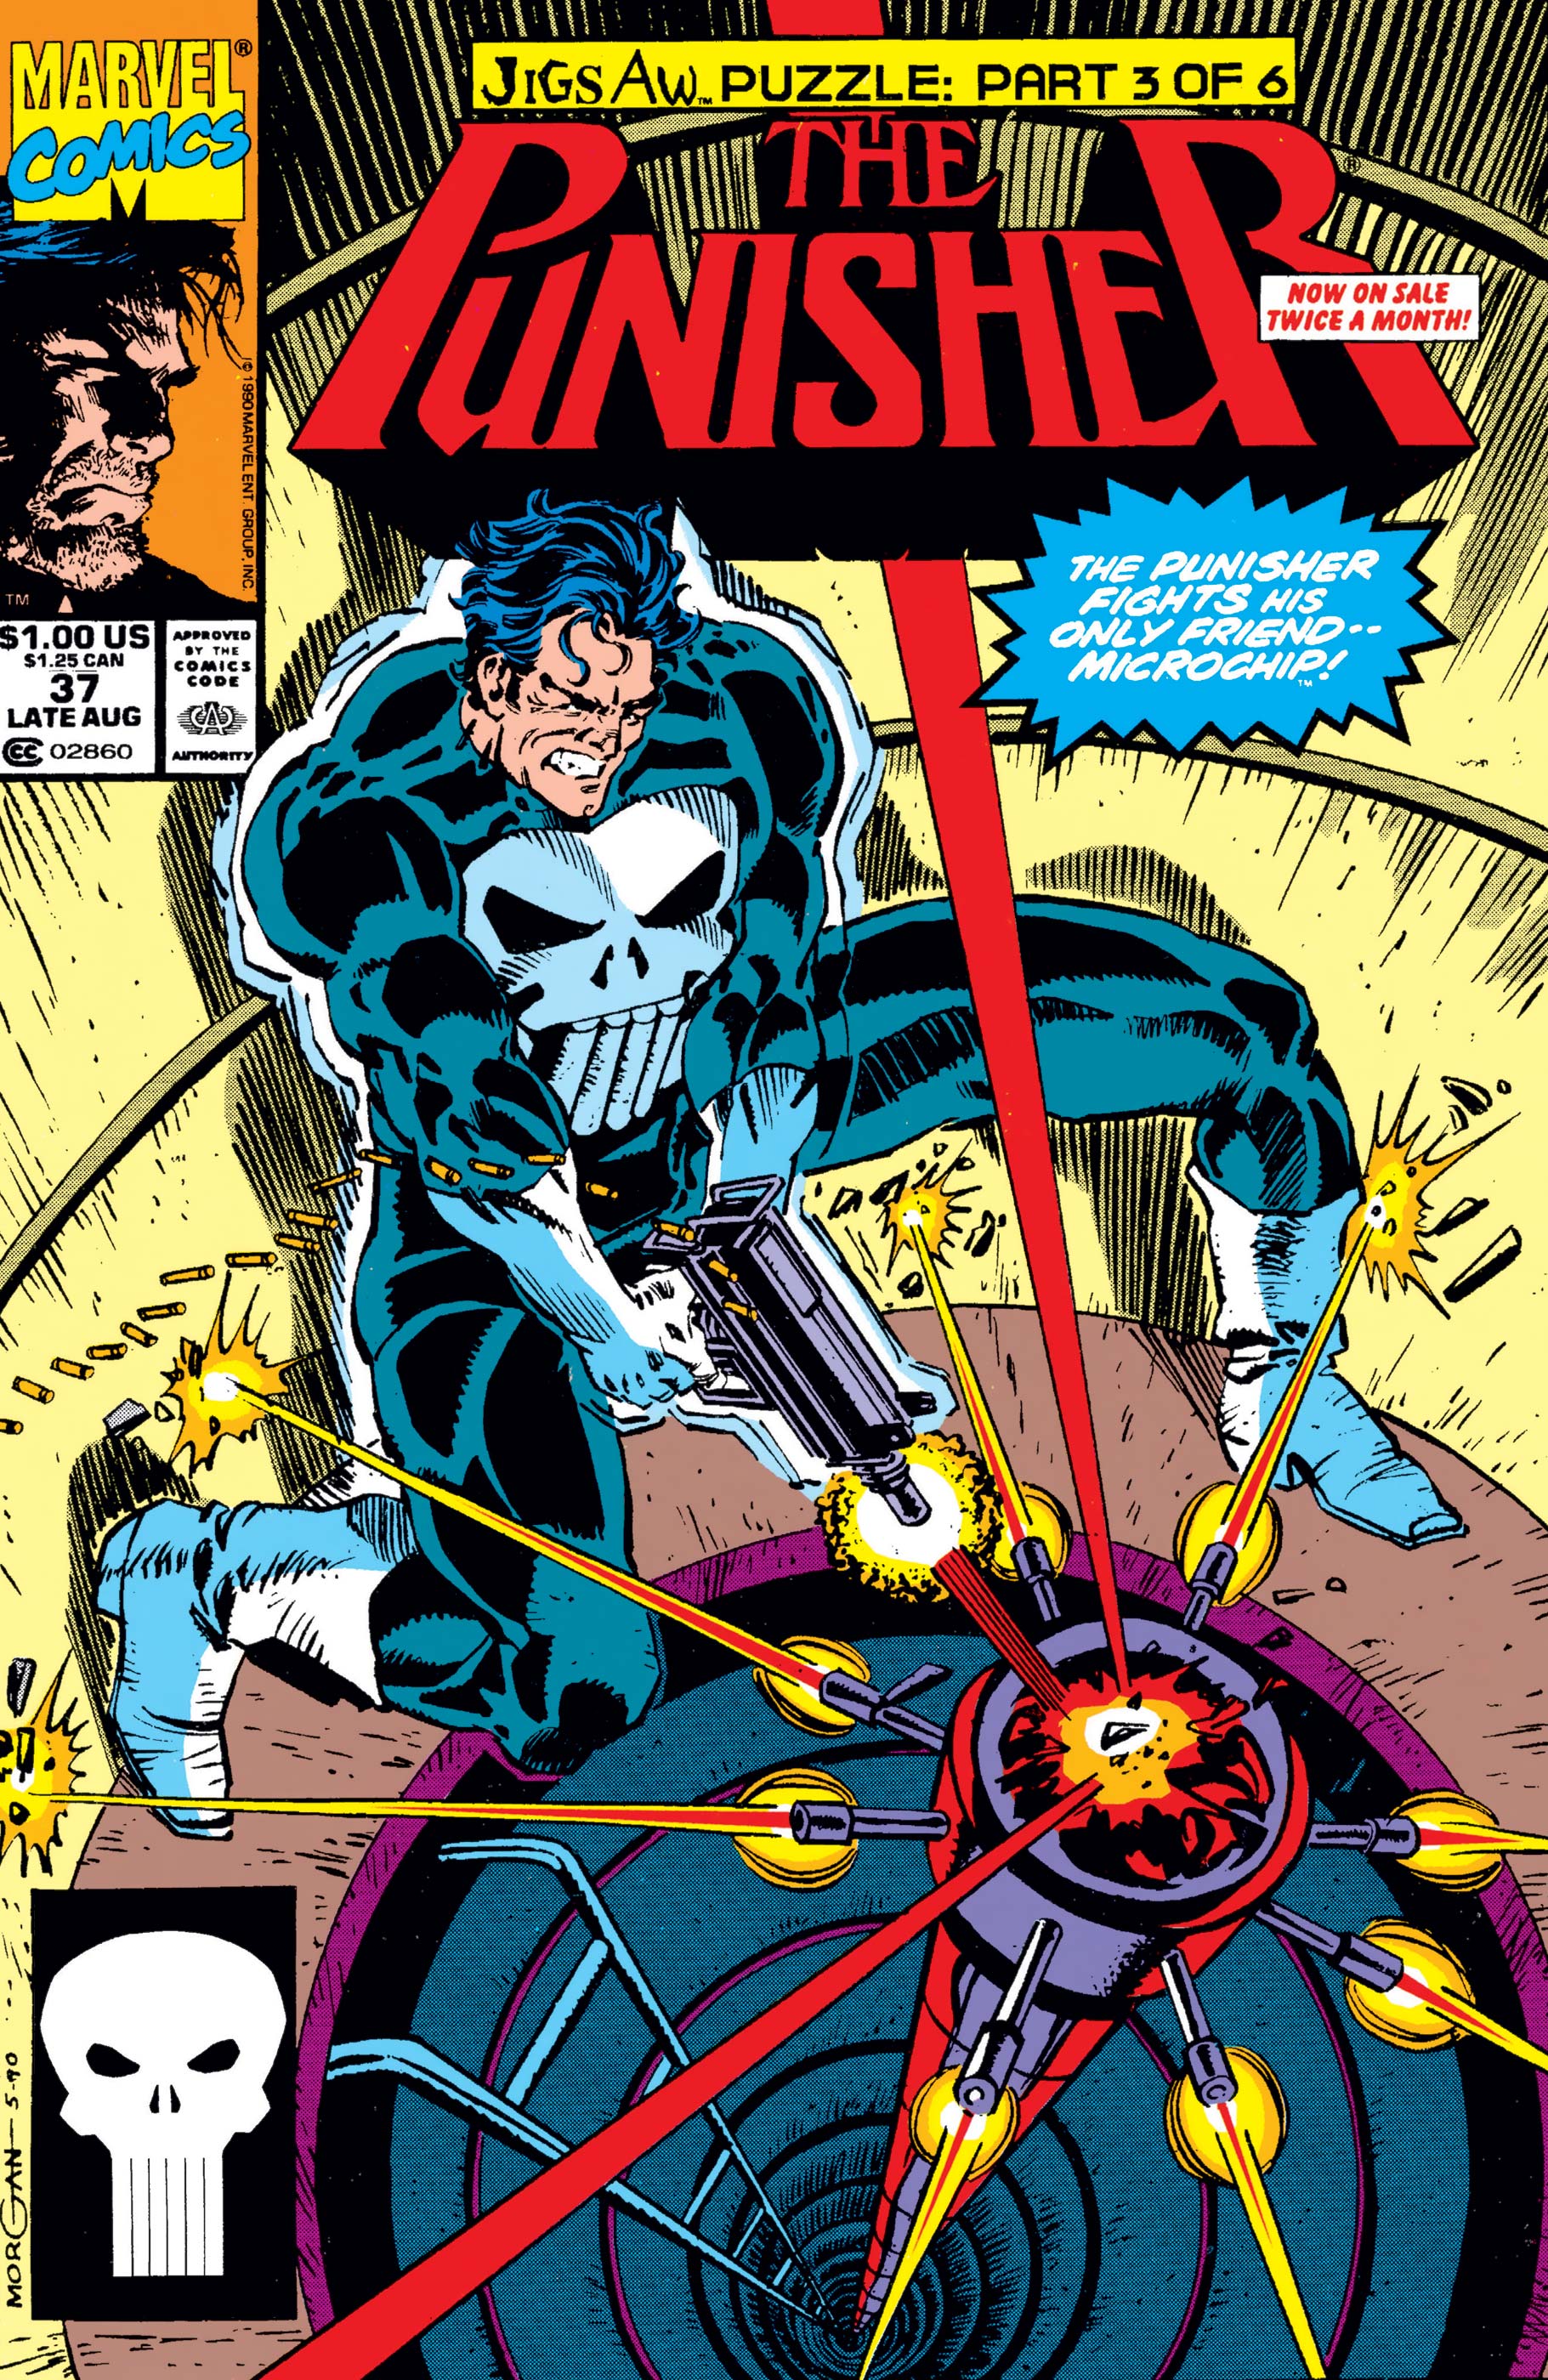 The Punisher (1987) #37